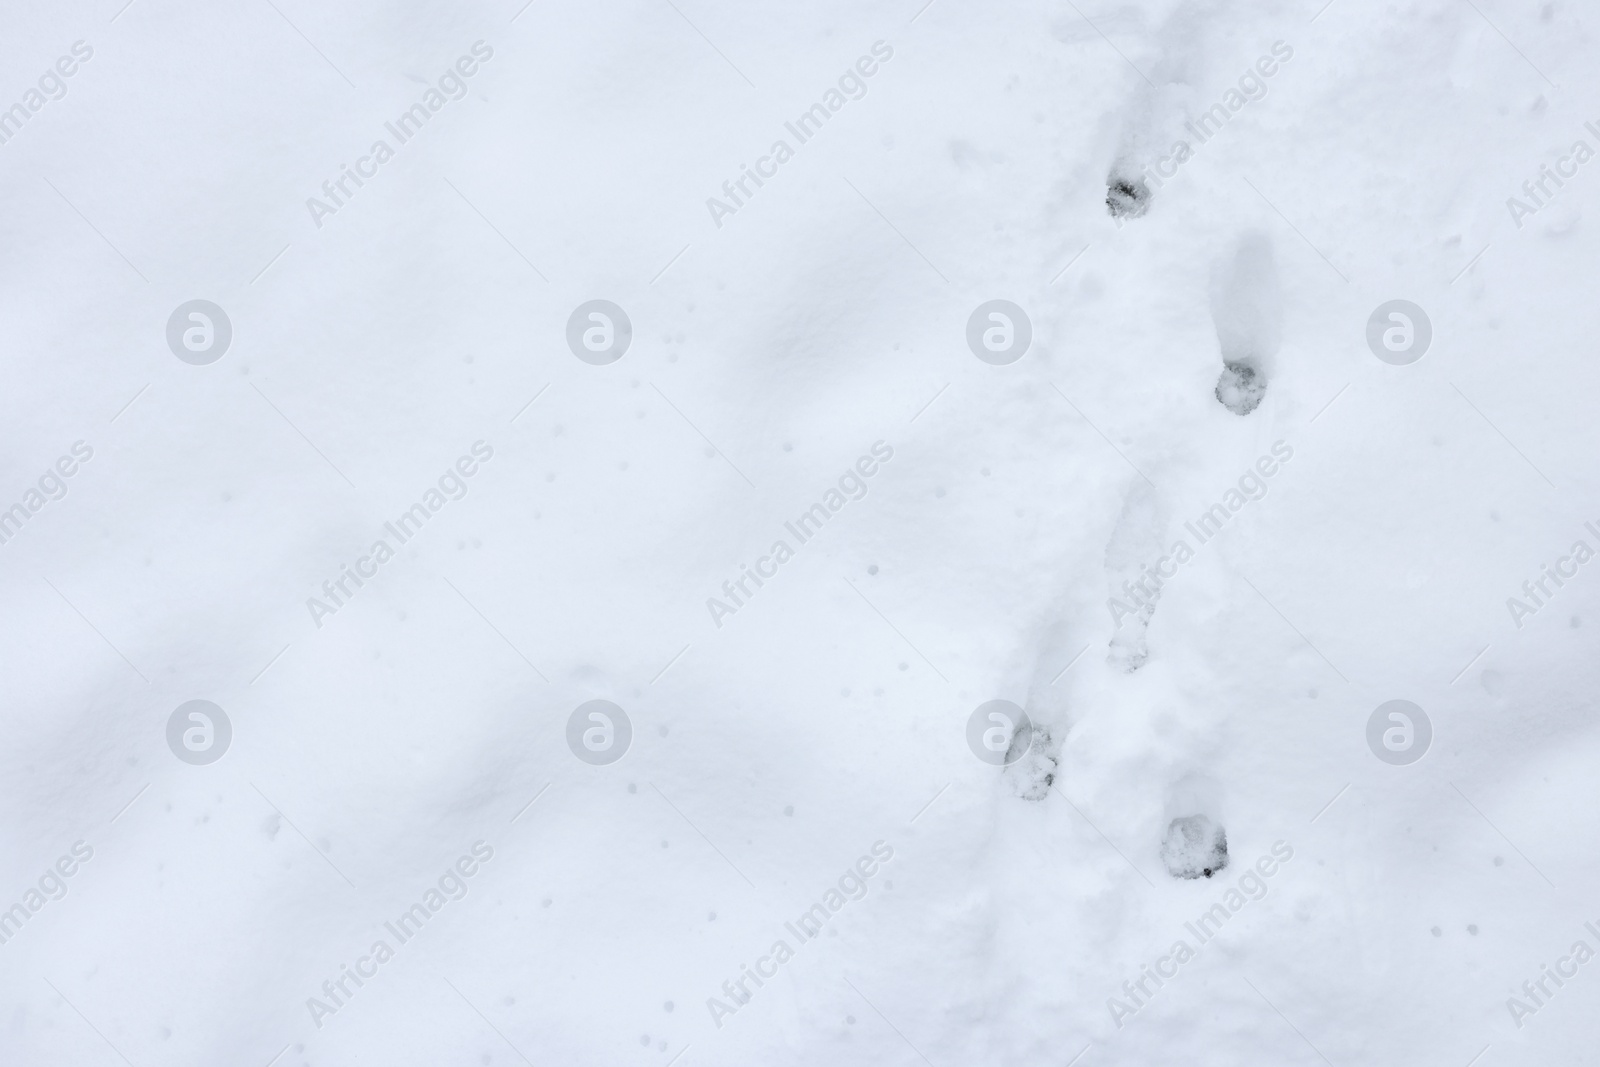 Photo of Human trails on snow outdoors, top view. Space for text